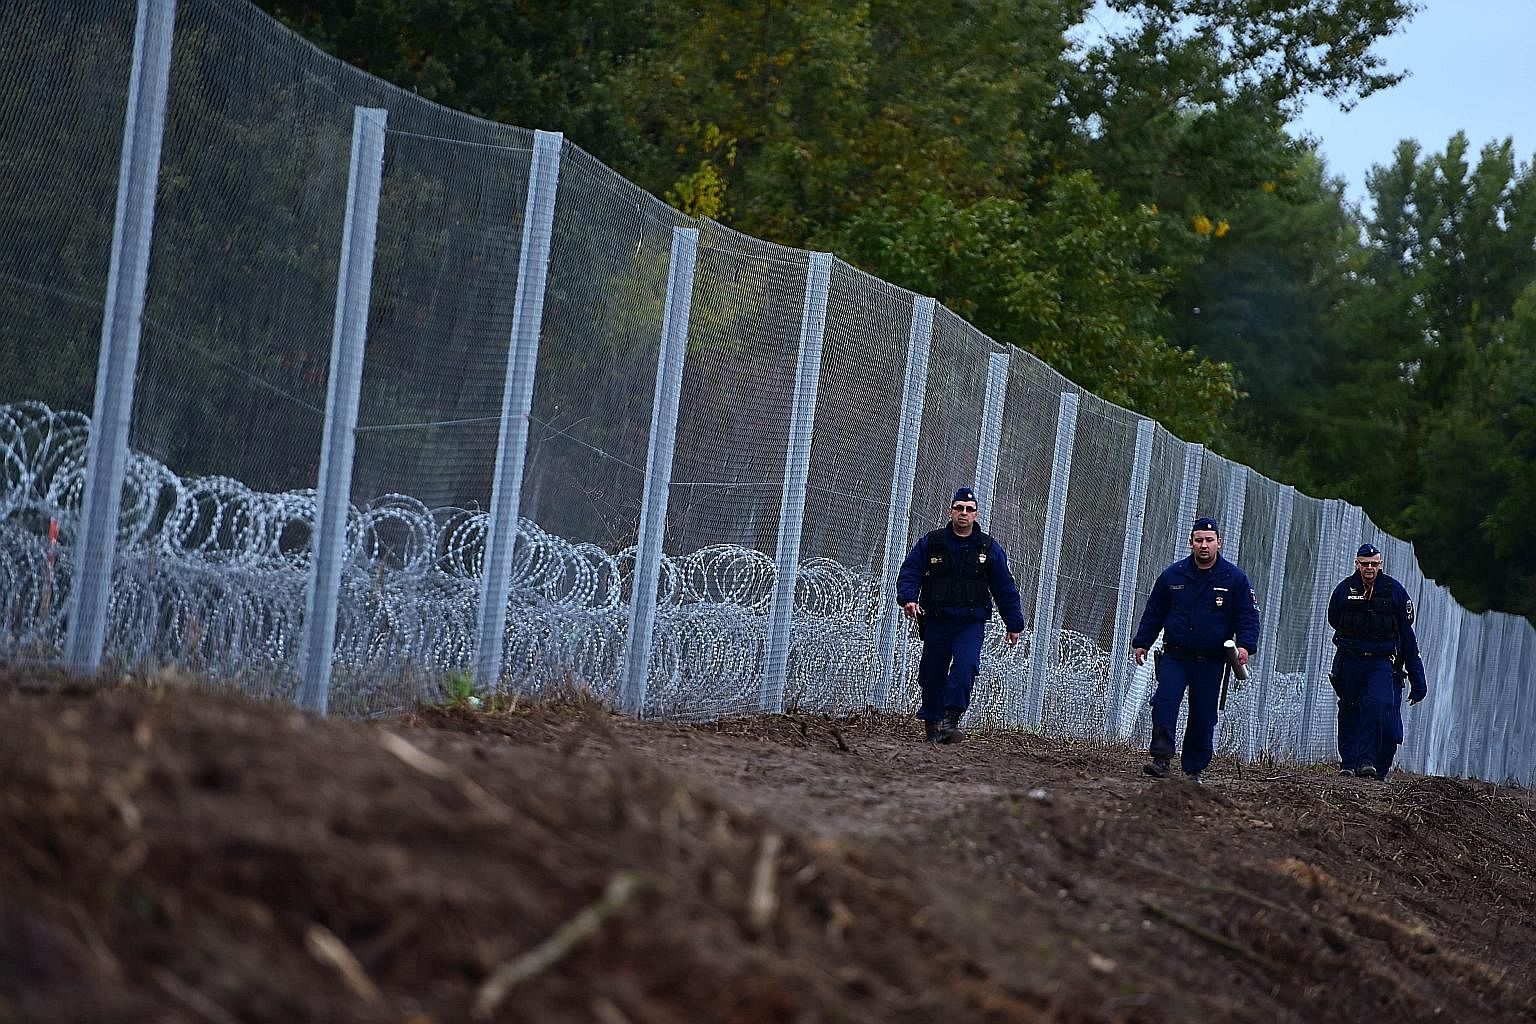 Police officers patrolling a newly erected fence at the Hungarian- Croatian border near Zakany. As governments erect barriers and reinstate border controls, the refugee crisis is disrupting flows of people and gumming up trade.